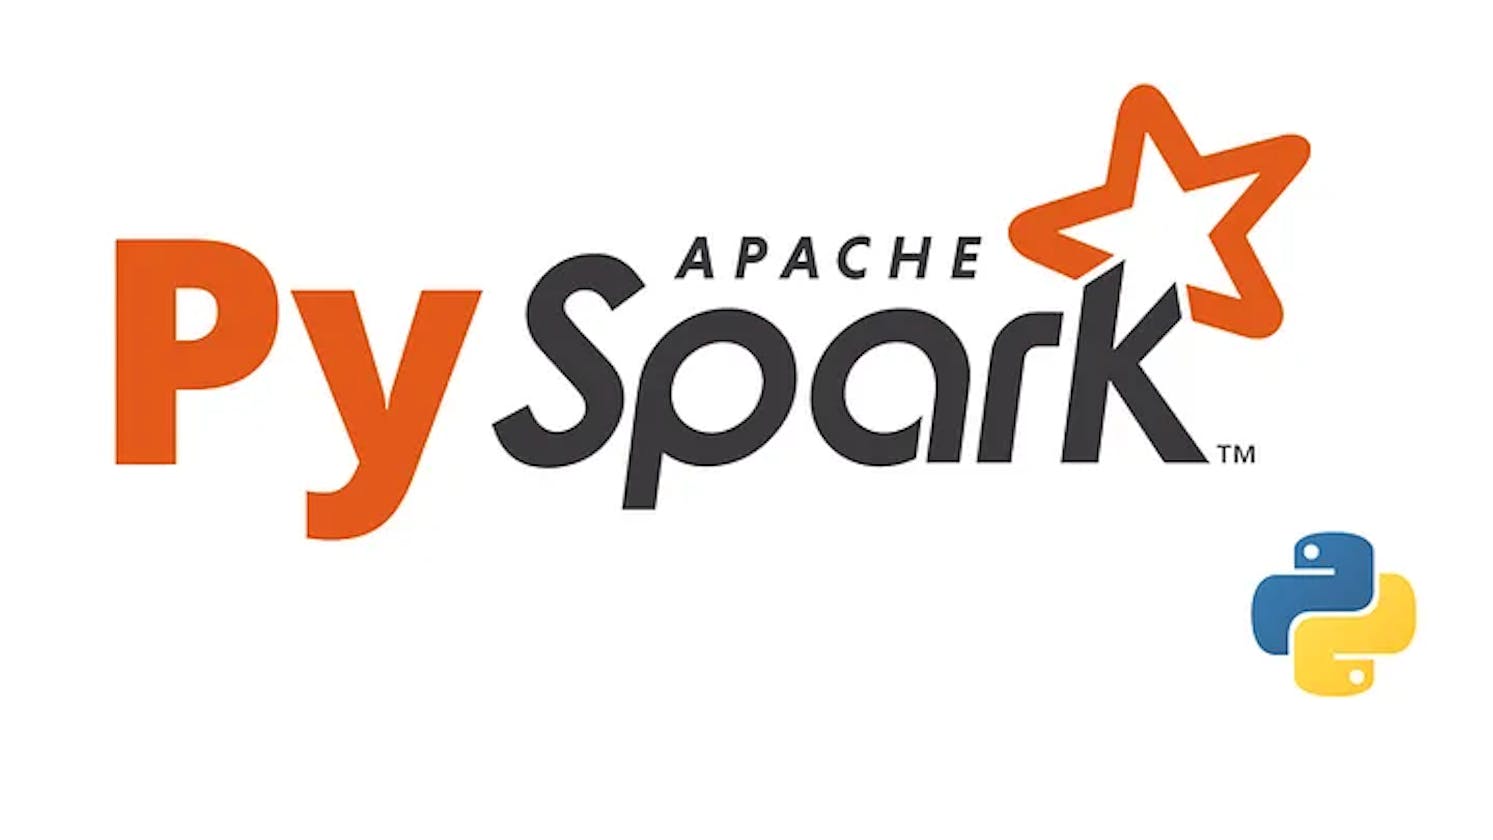 Loading, Transforming, and Saving GitHub Archive Data with PySpark